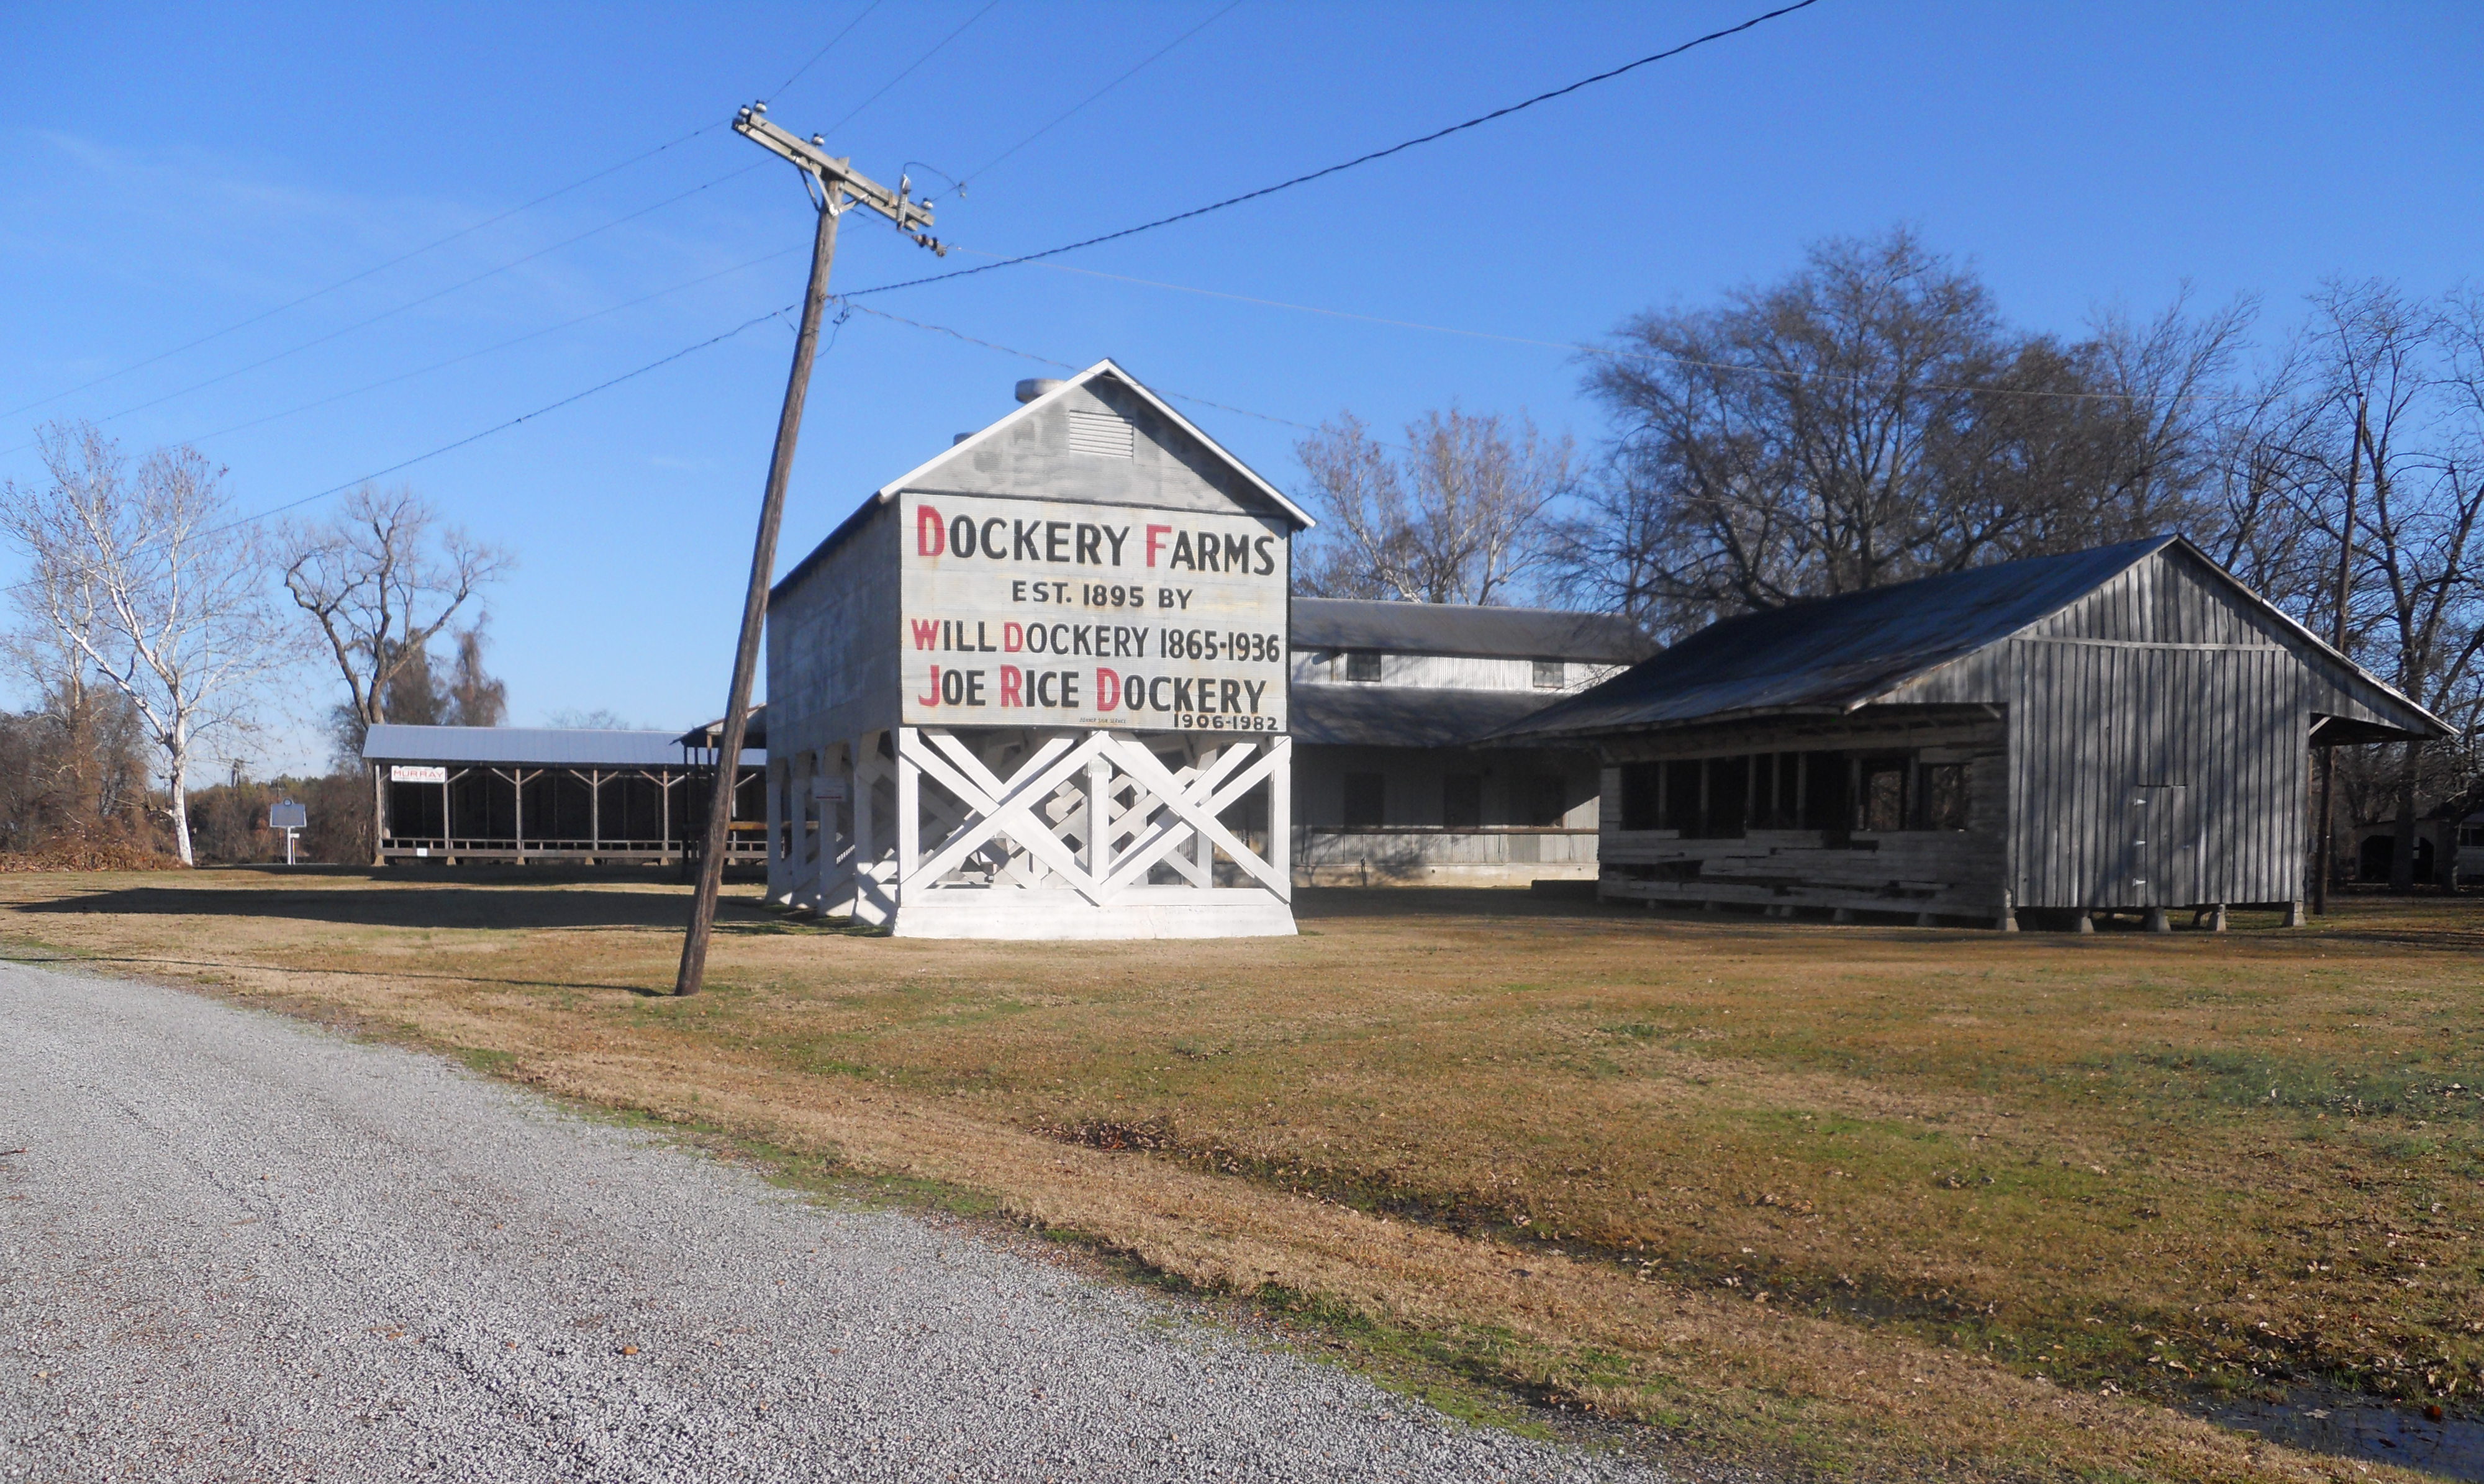 Dockery Farms. Between Cleveland, MS, and Ruleville, MS. Farm buildings under a blue sky.